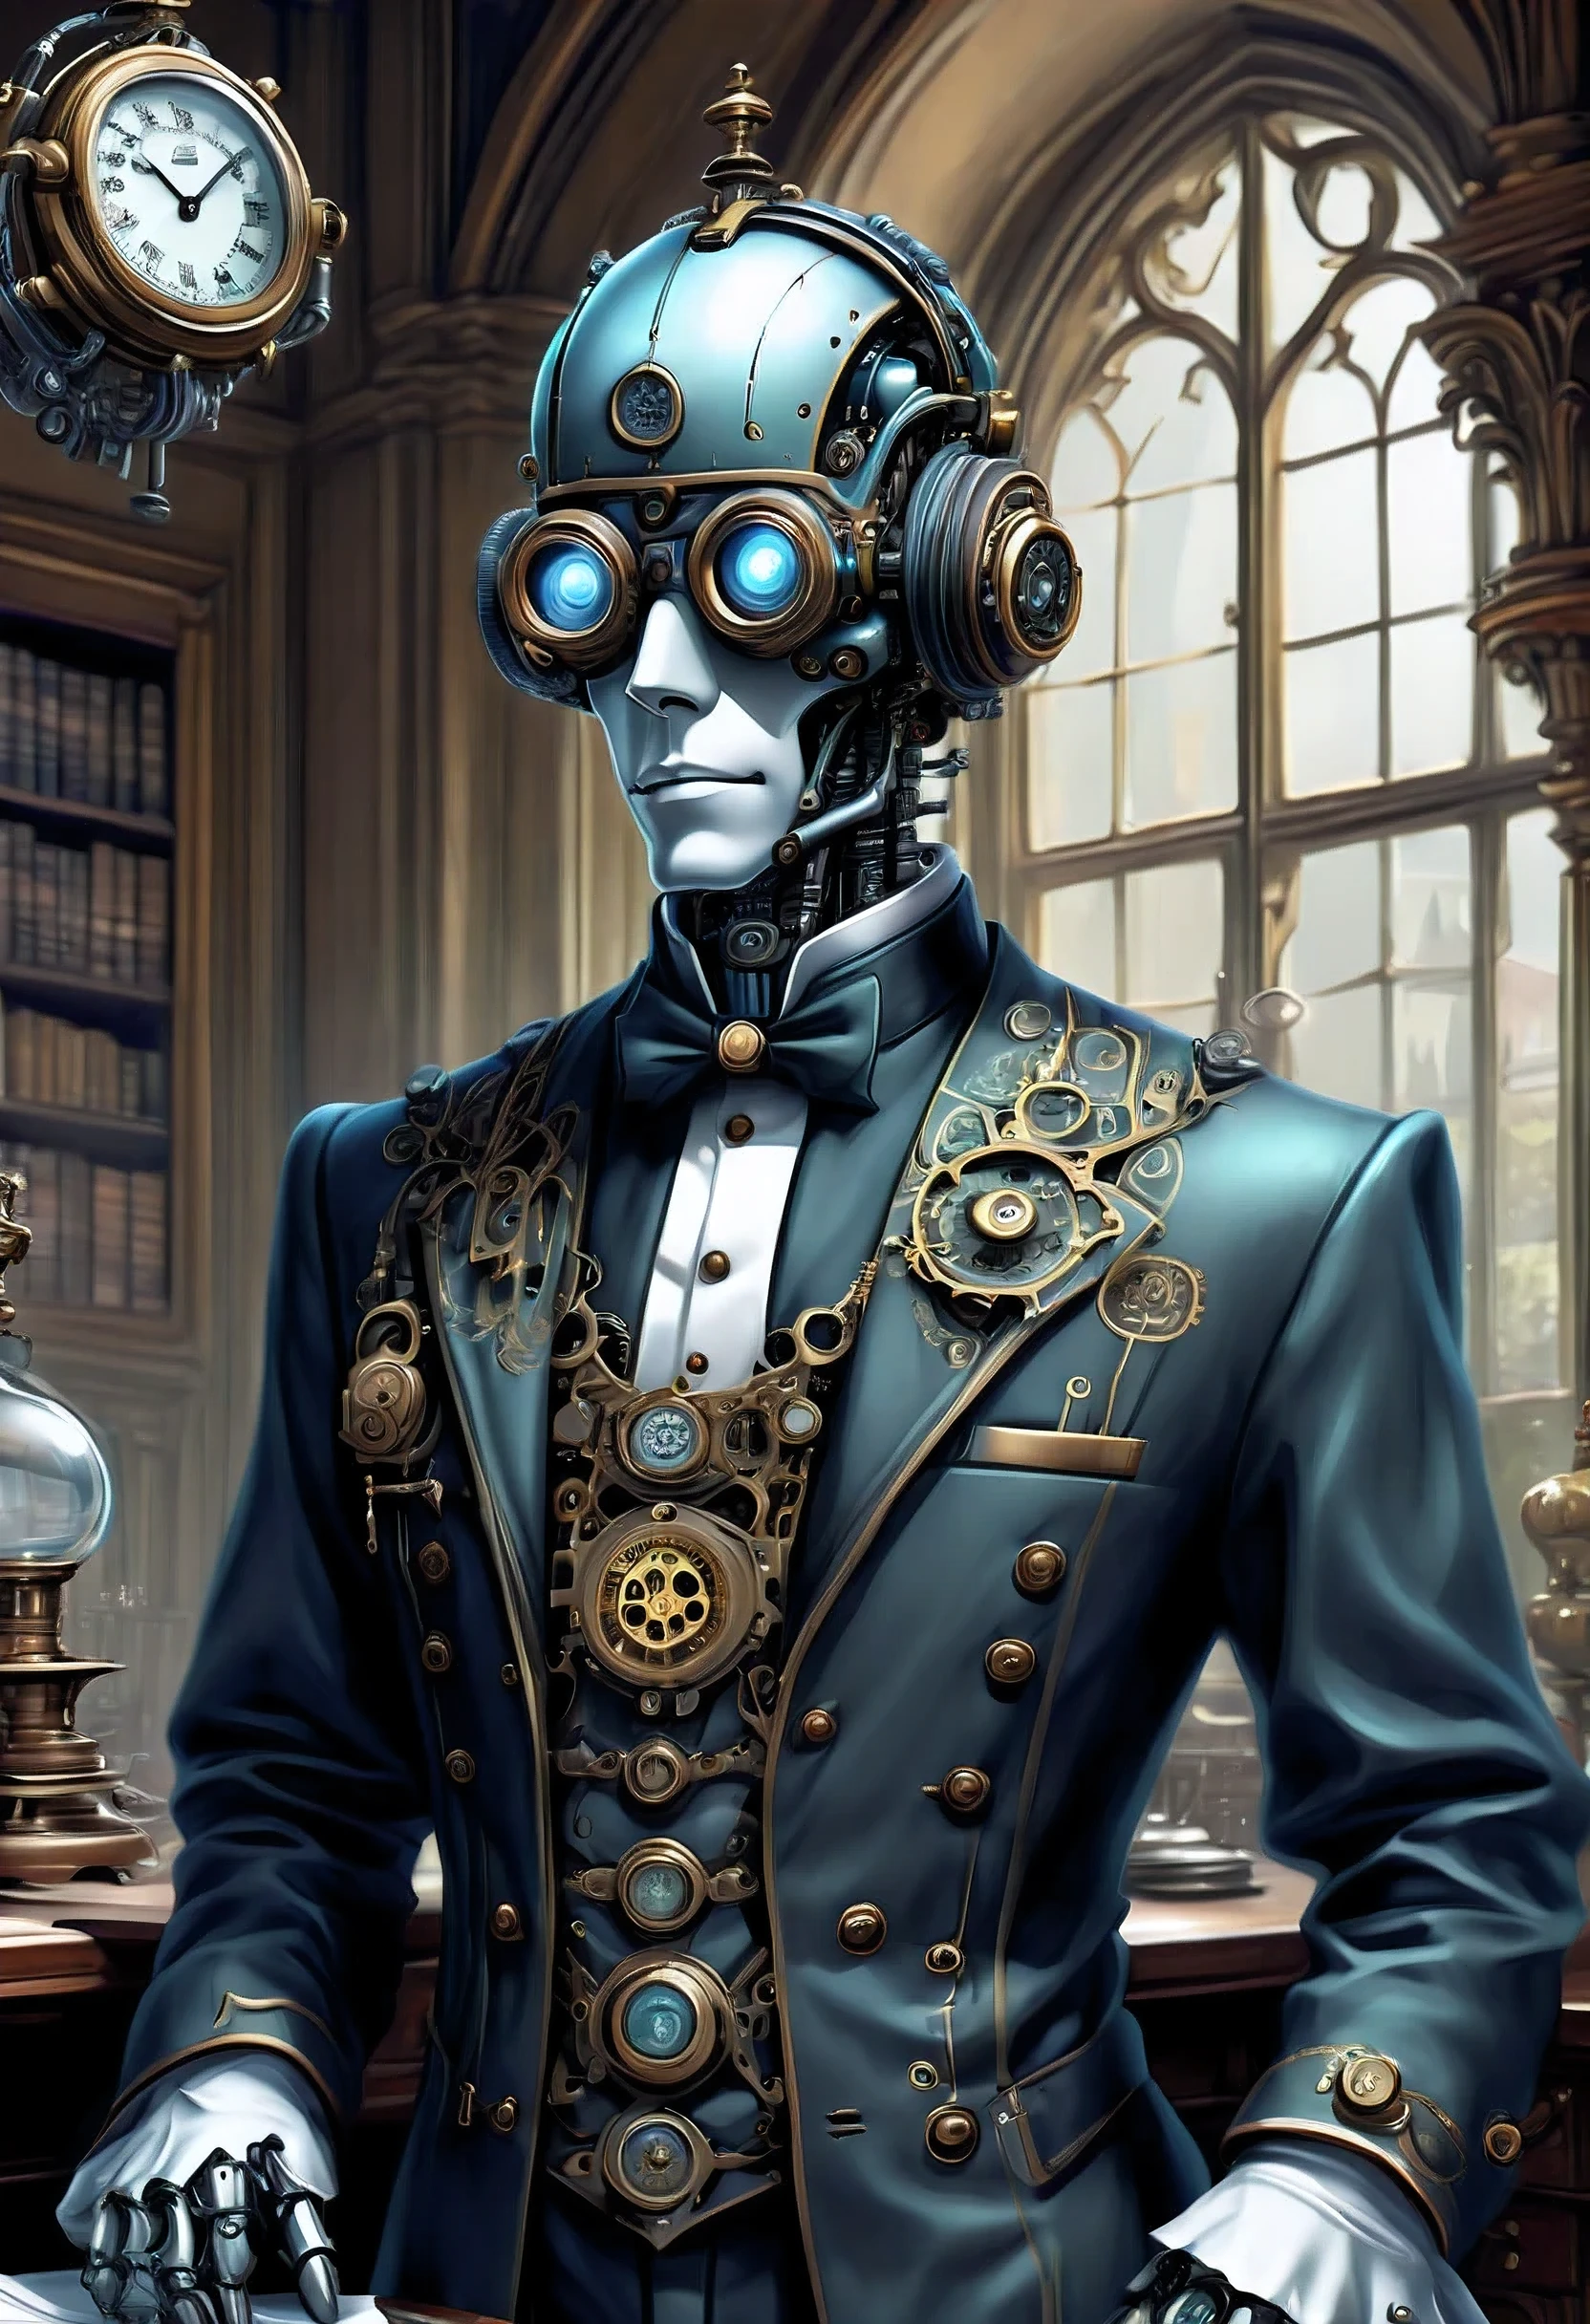 Robot Butler with Mechanical Engineering Profile, steampunk tie, detail soft shadow, Mechanical face with an ennui atmosphere, Mechanical decorative cane with one hand, frombelow, Mechanically with intricate and insane details, About the intricately detailed butler uniform, subtle lighting elements, cool beauty mechanical, Full body shot, From Side, nice cyber butler outfit, An atmosphere of beauty like a finely honed blade, very fine shadows, drizzle doodle background, eternal time clock, It feels like the wind of eternity, Lonely atmosphere, dim white lighting, street art graffiti inspiration, Eyes that show sadness, brave expression, darkest twilight, Detail of darkest core oil paint illustration, ultra clear details, very clear texture, complex brush strokes, High quality, High resolution, of the highest quality,